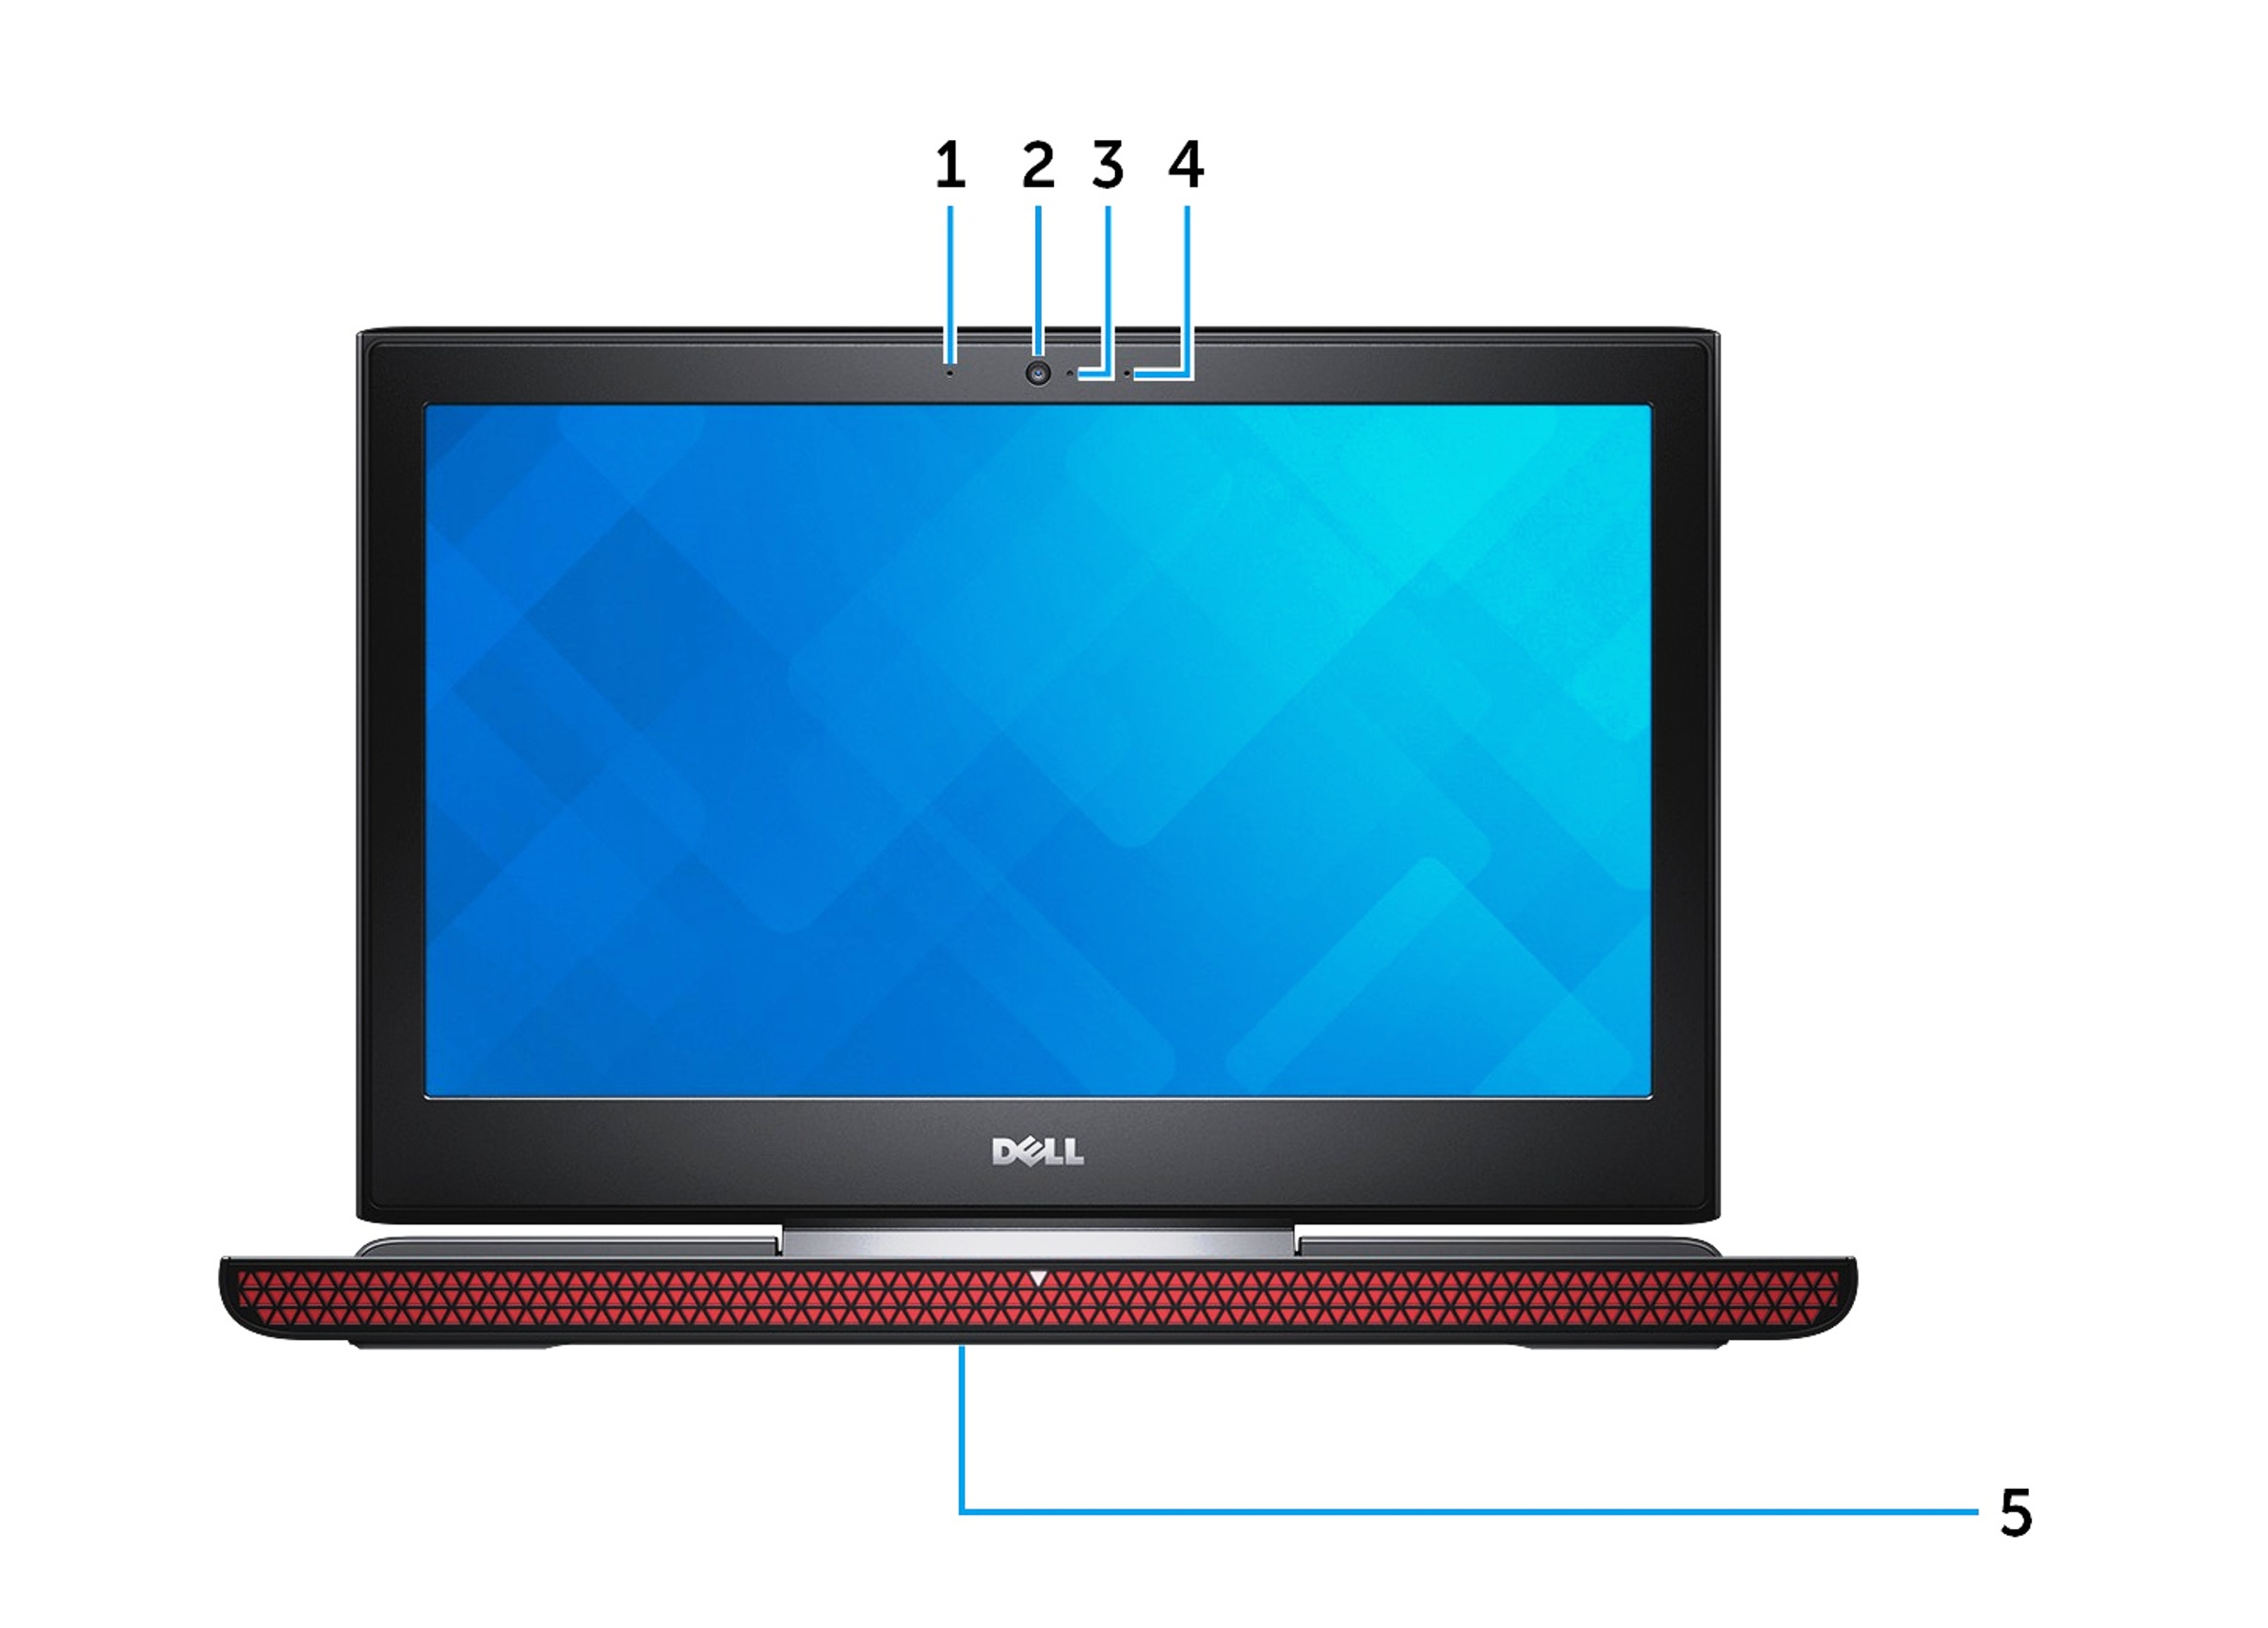 Dell Inspiron 14 7000 7467 Gaming Laptop Specs and Review